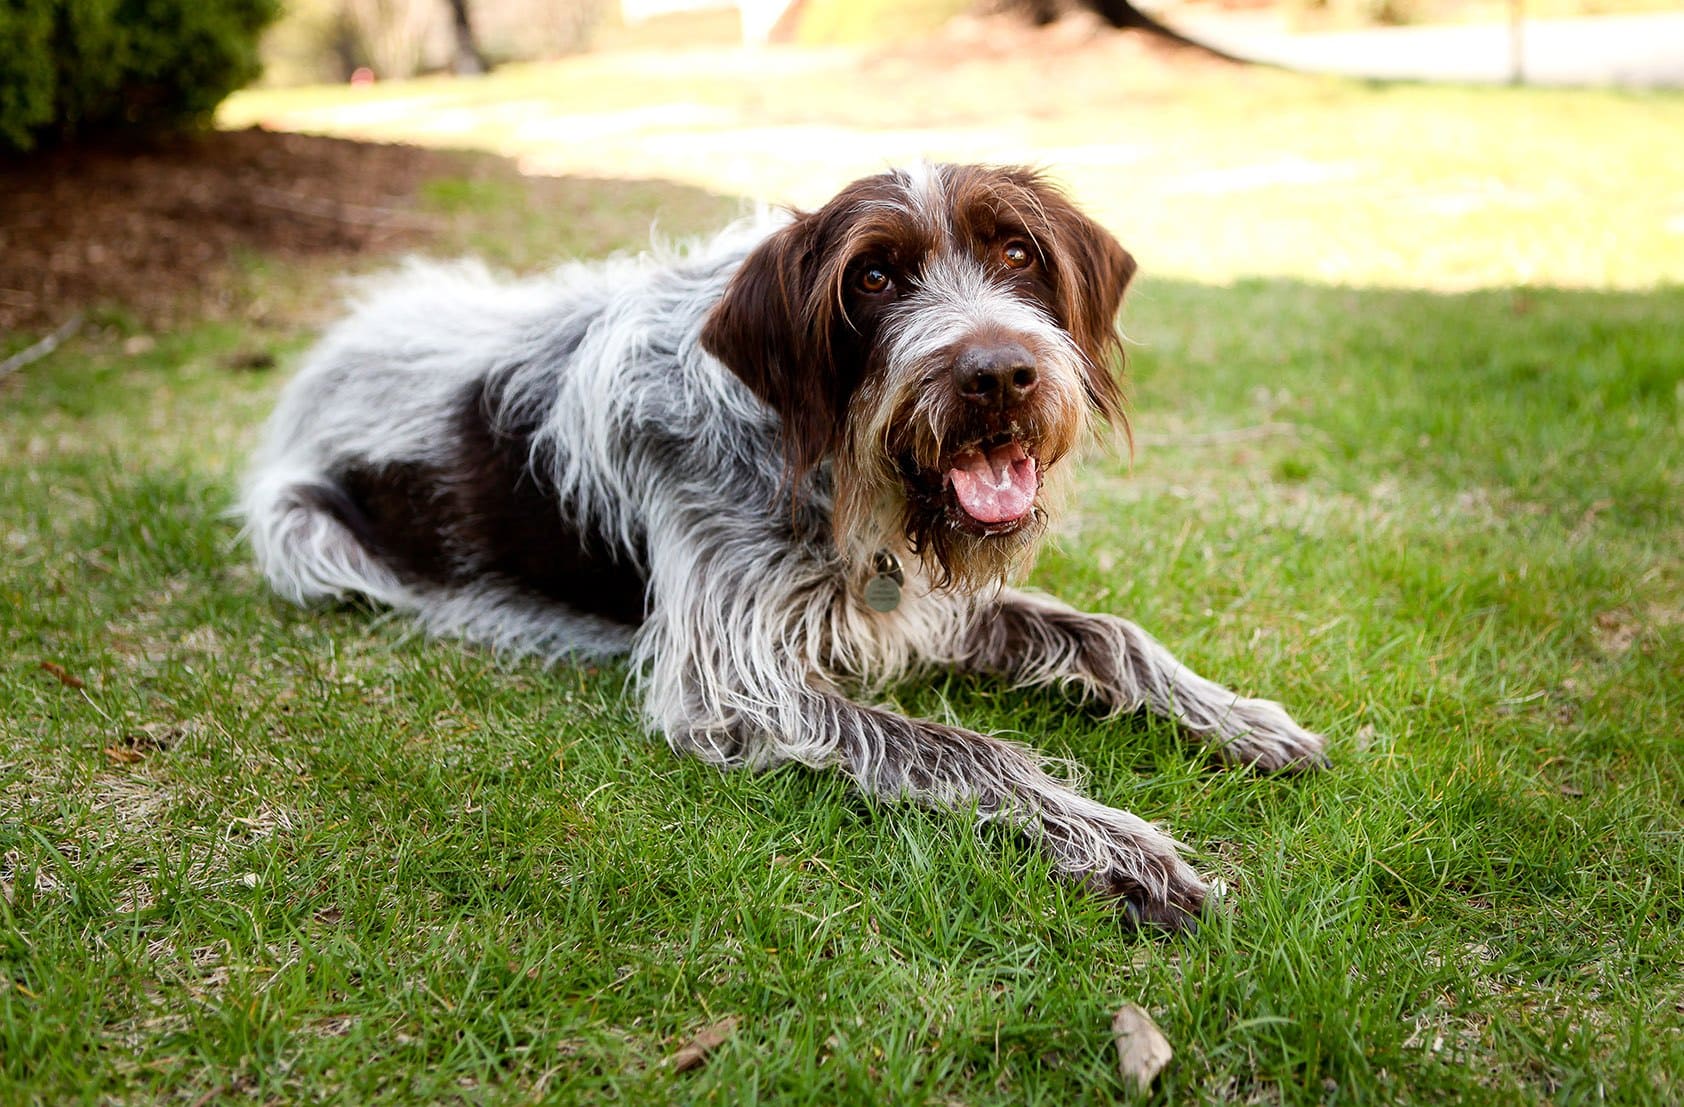 Wirehaired Pointing Griffon in the grass